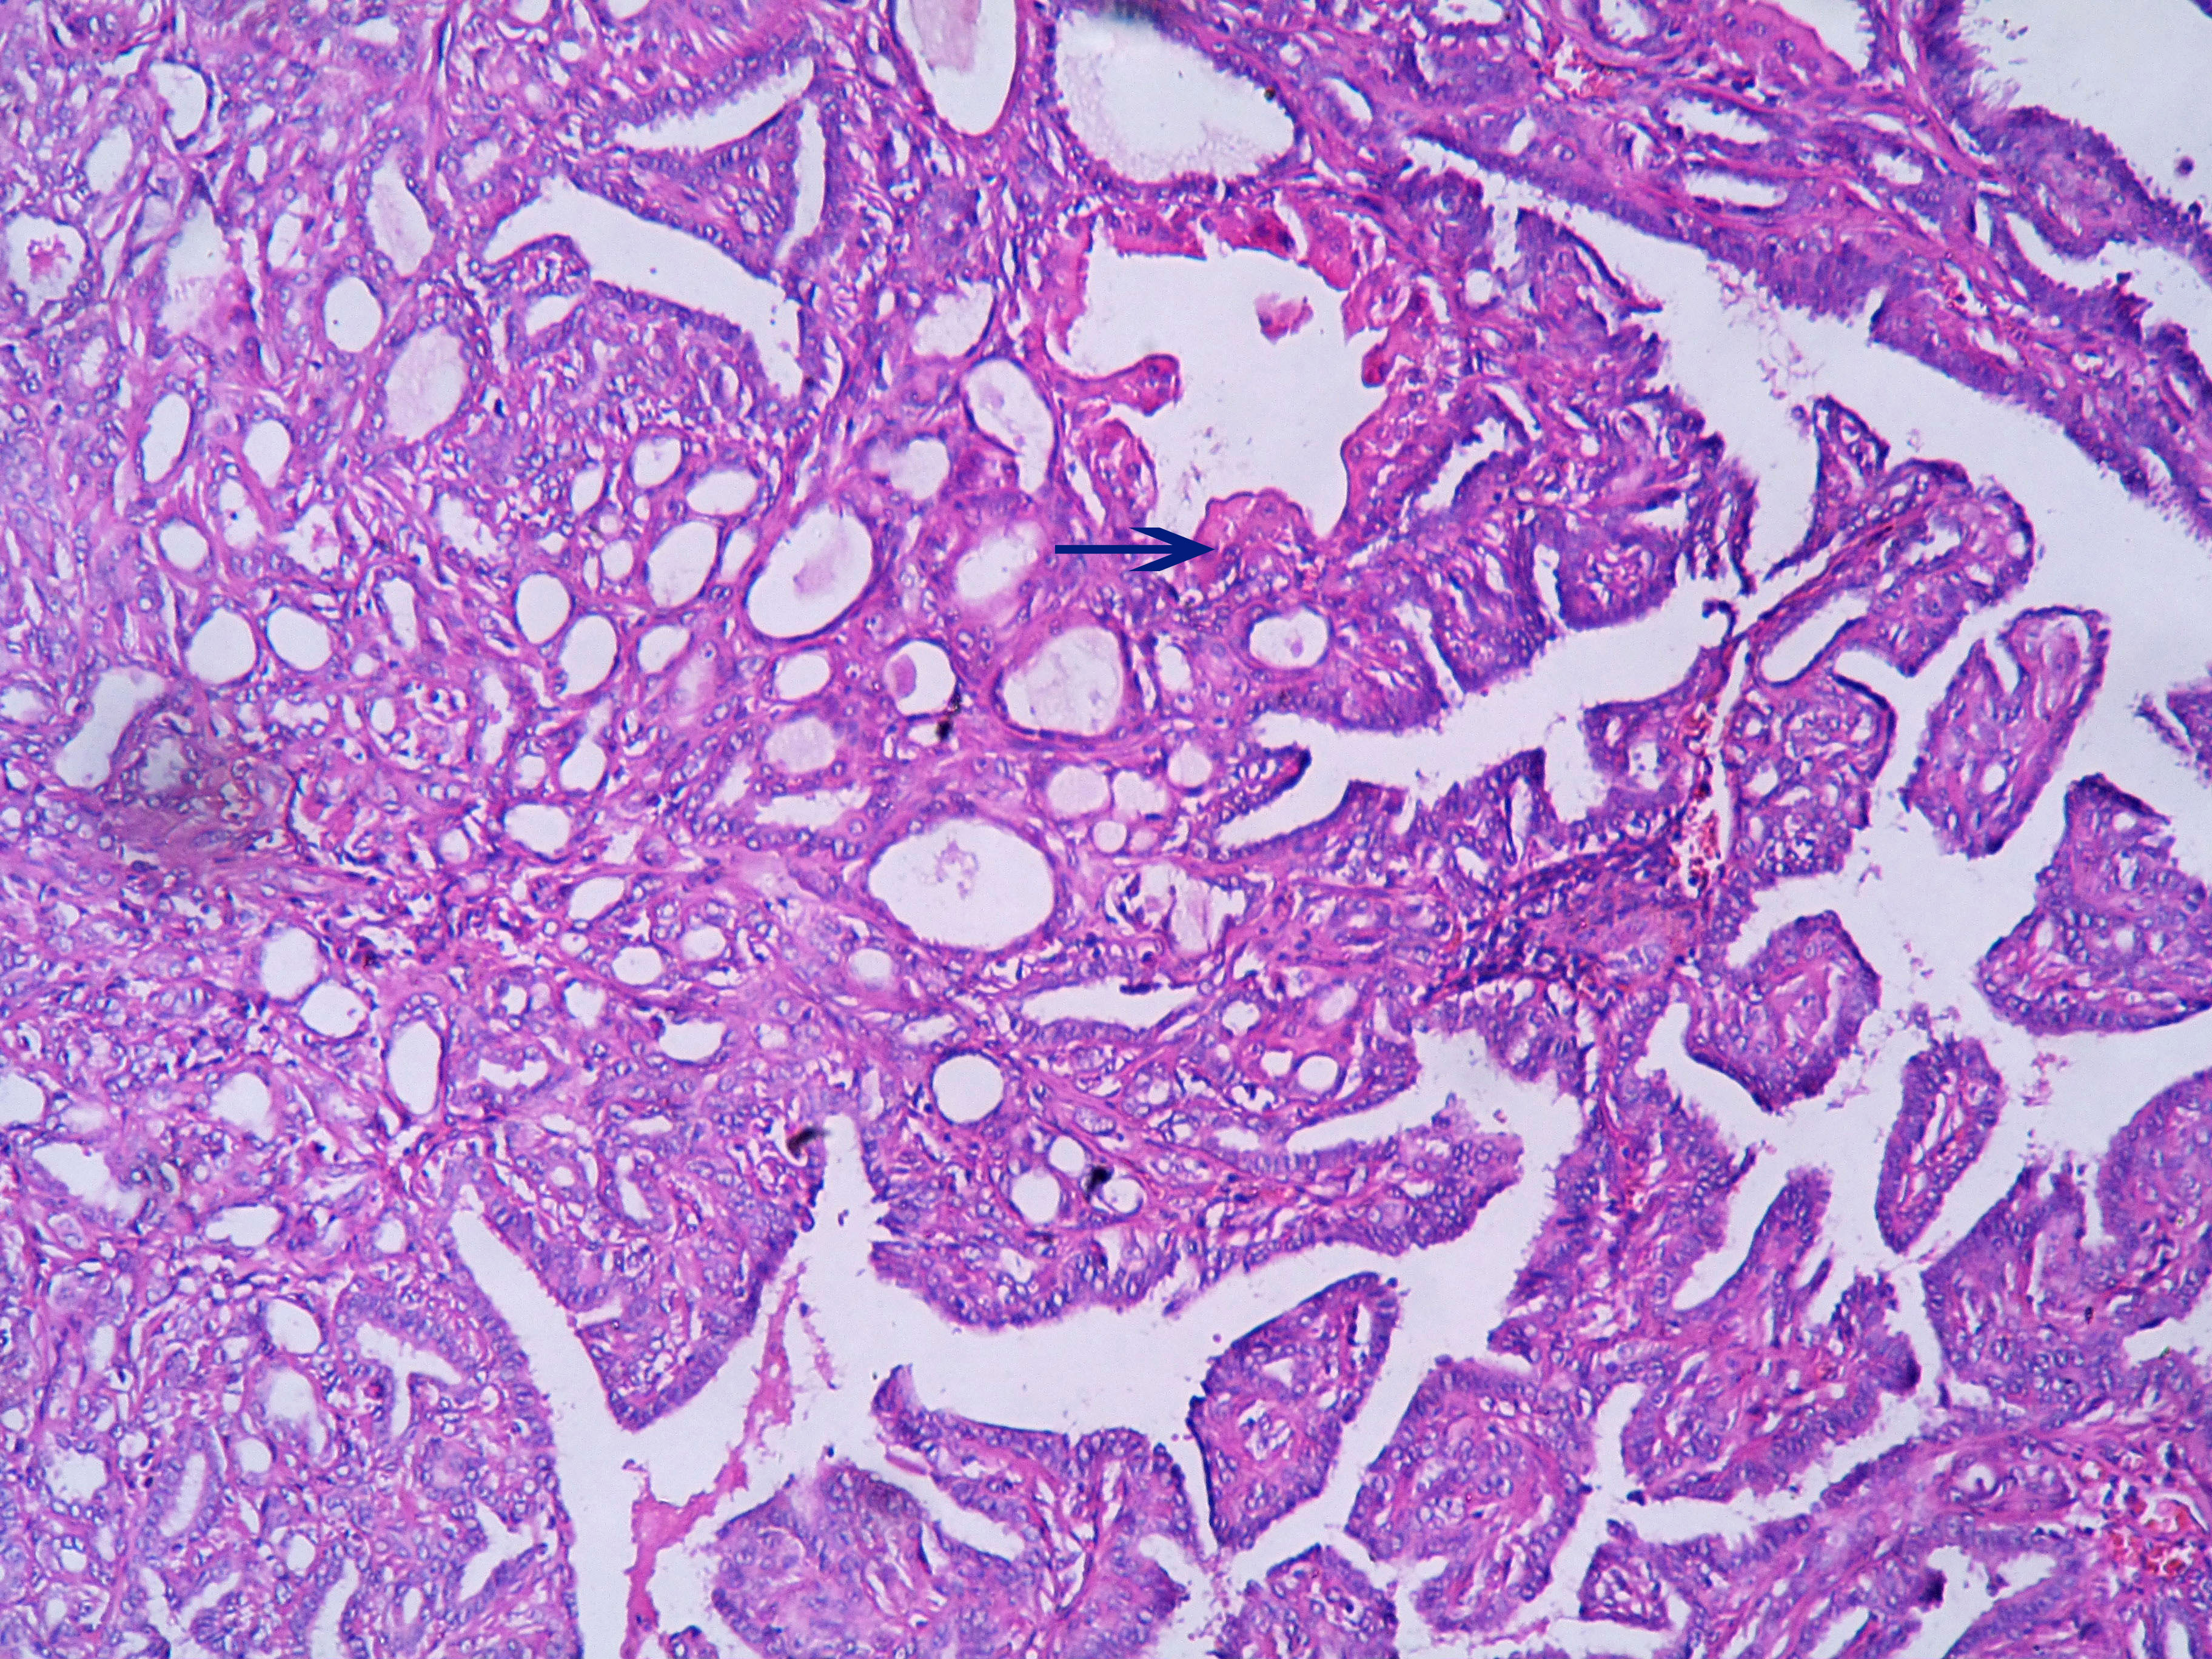 intraductal papilloma with epithelial hyperplasia)